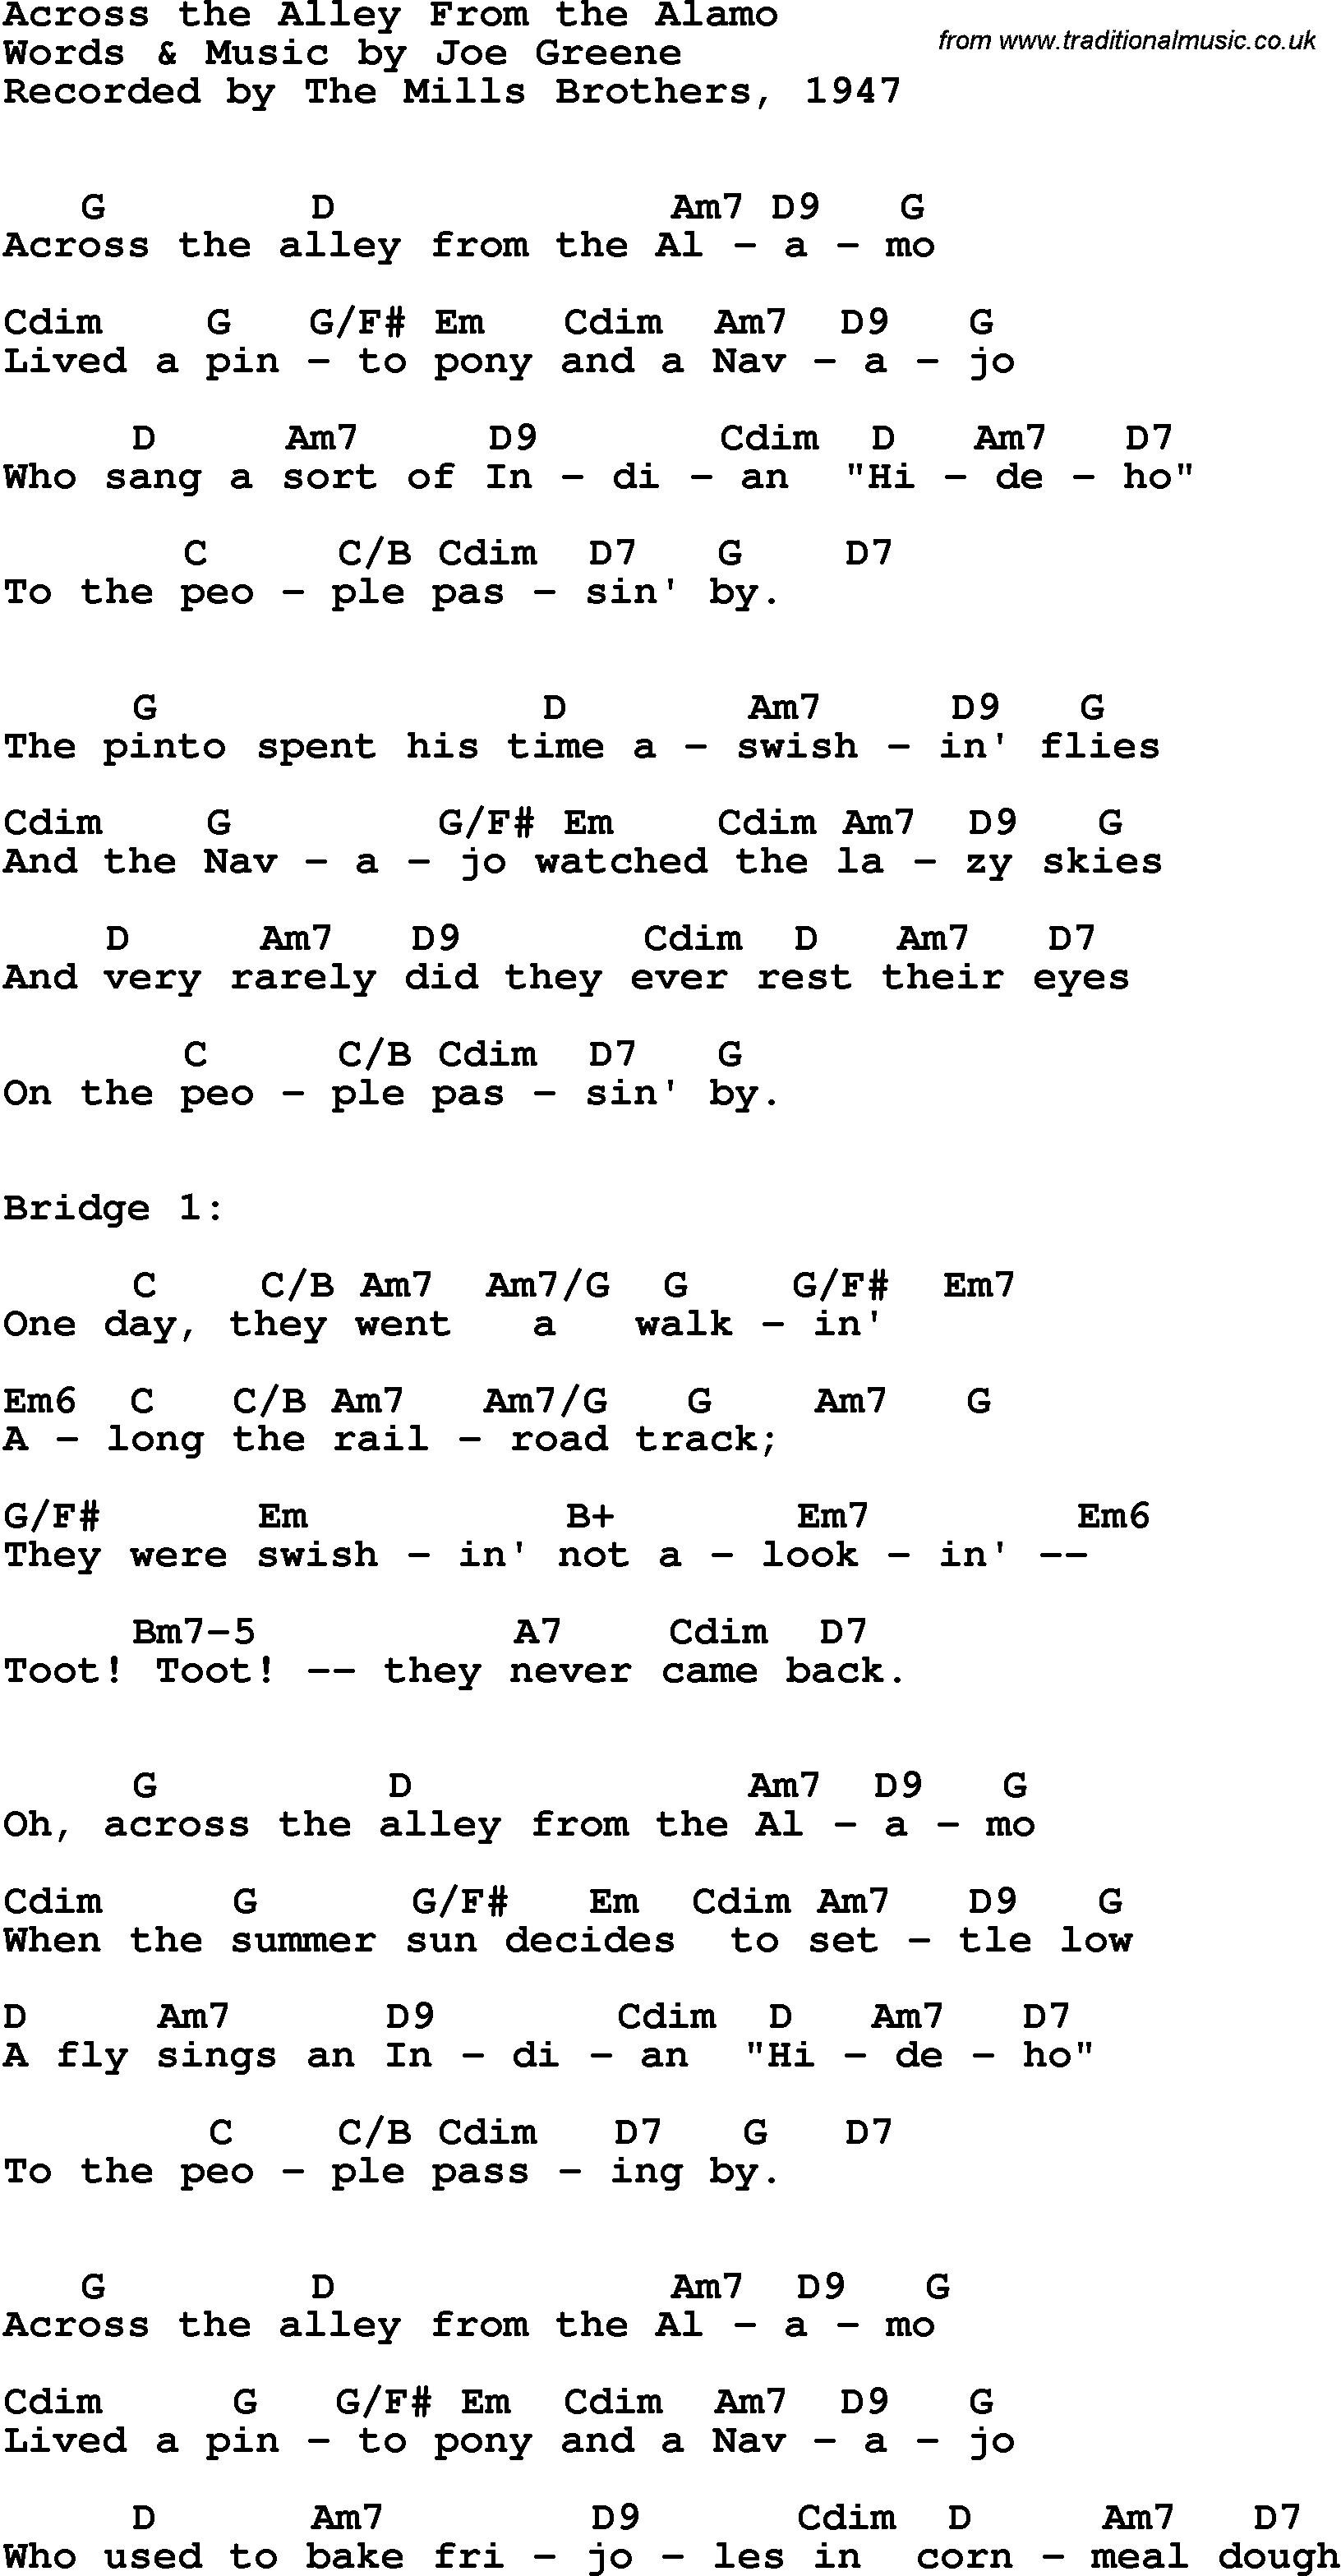 Song Lyrics with guitar chords for Across The Alley From The Alamo - The Mills Brothers, 1947